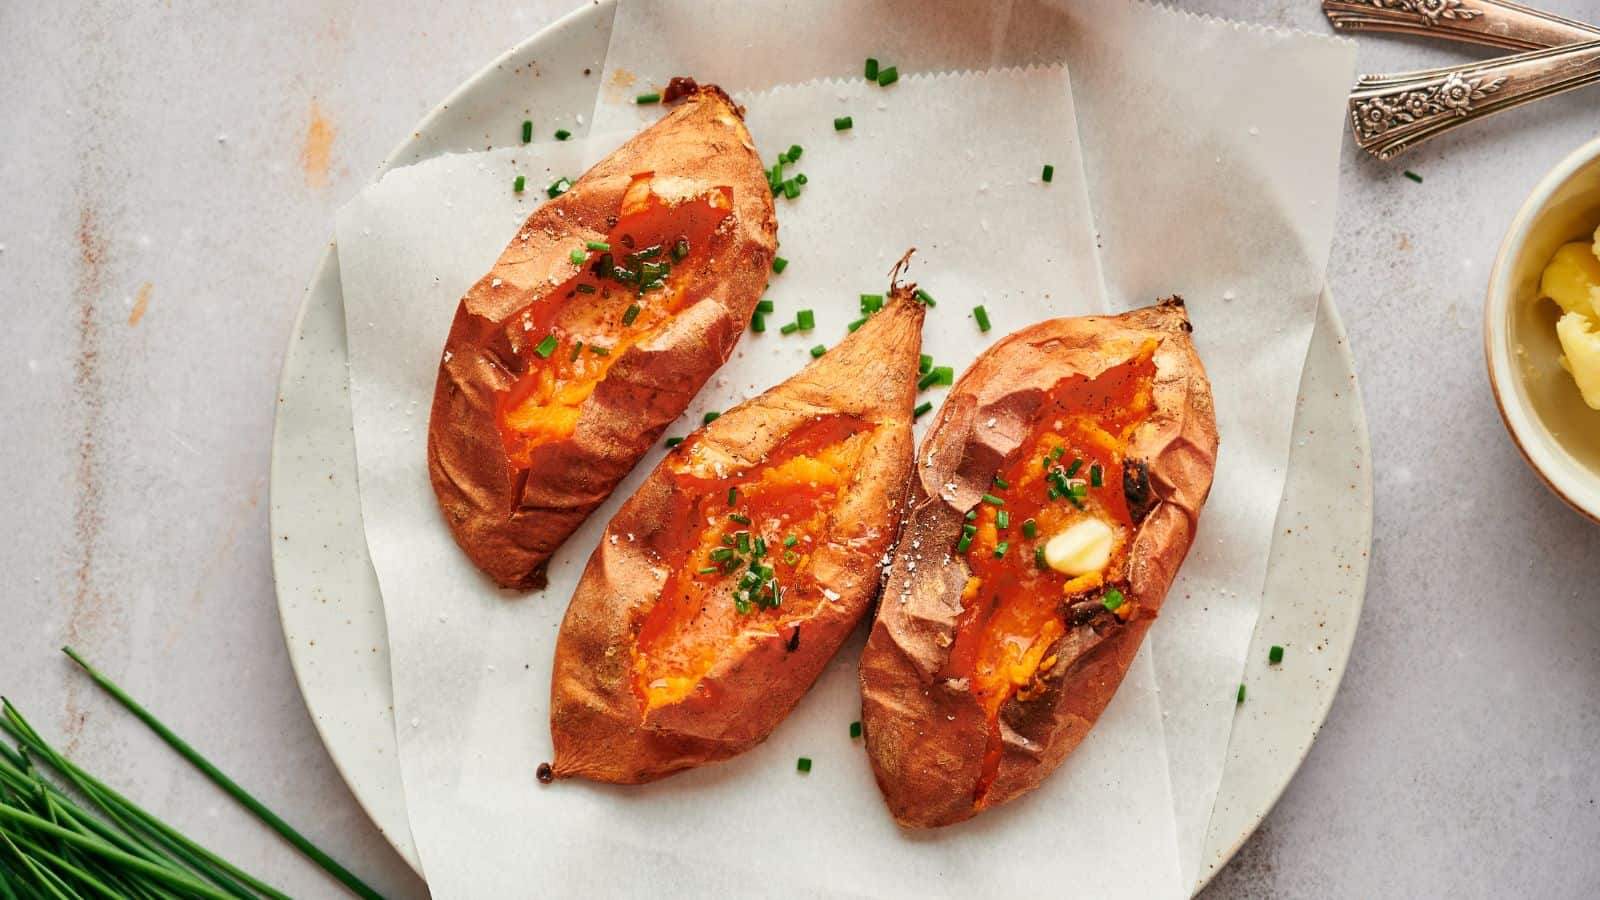 Three roasted sweet potatoes on a plate with chives.